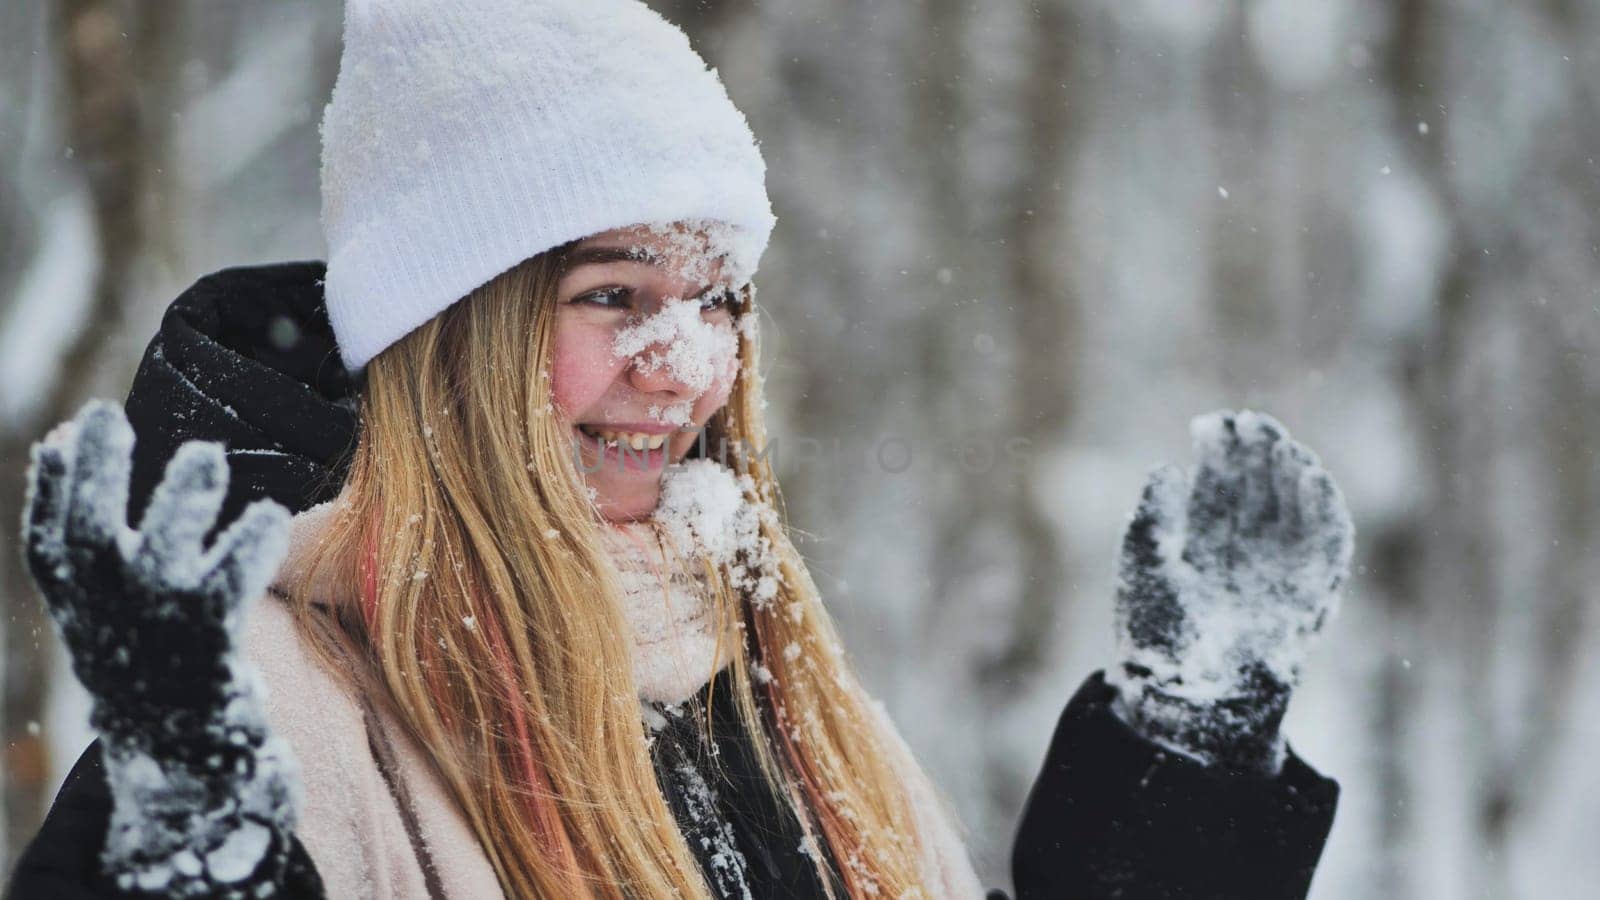 Teenage girl playing with snow. by DovidPro